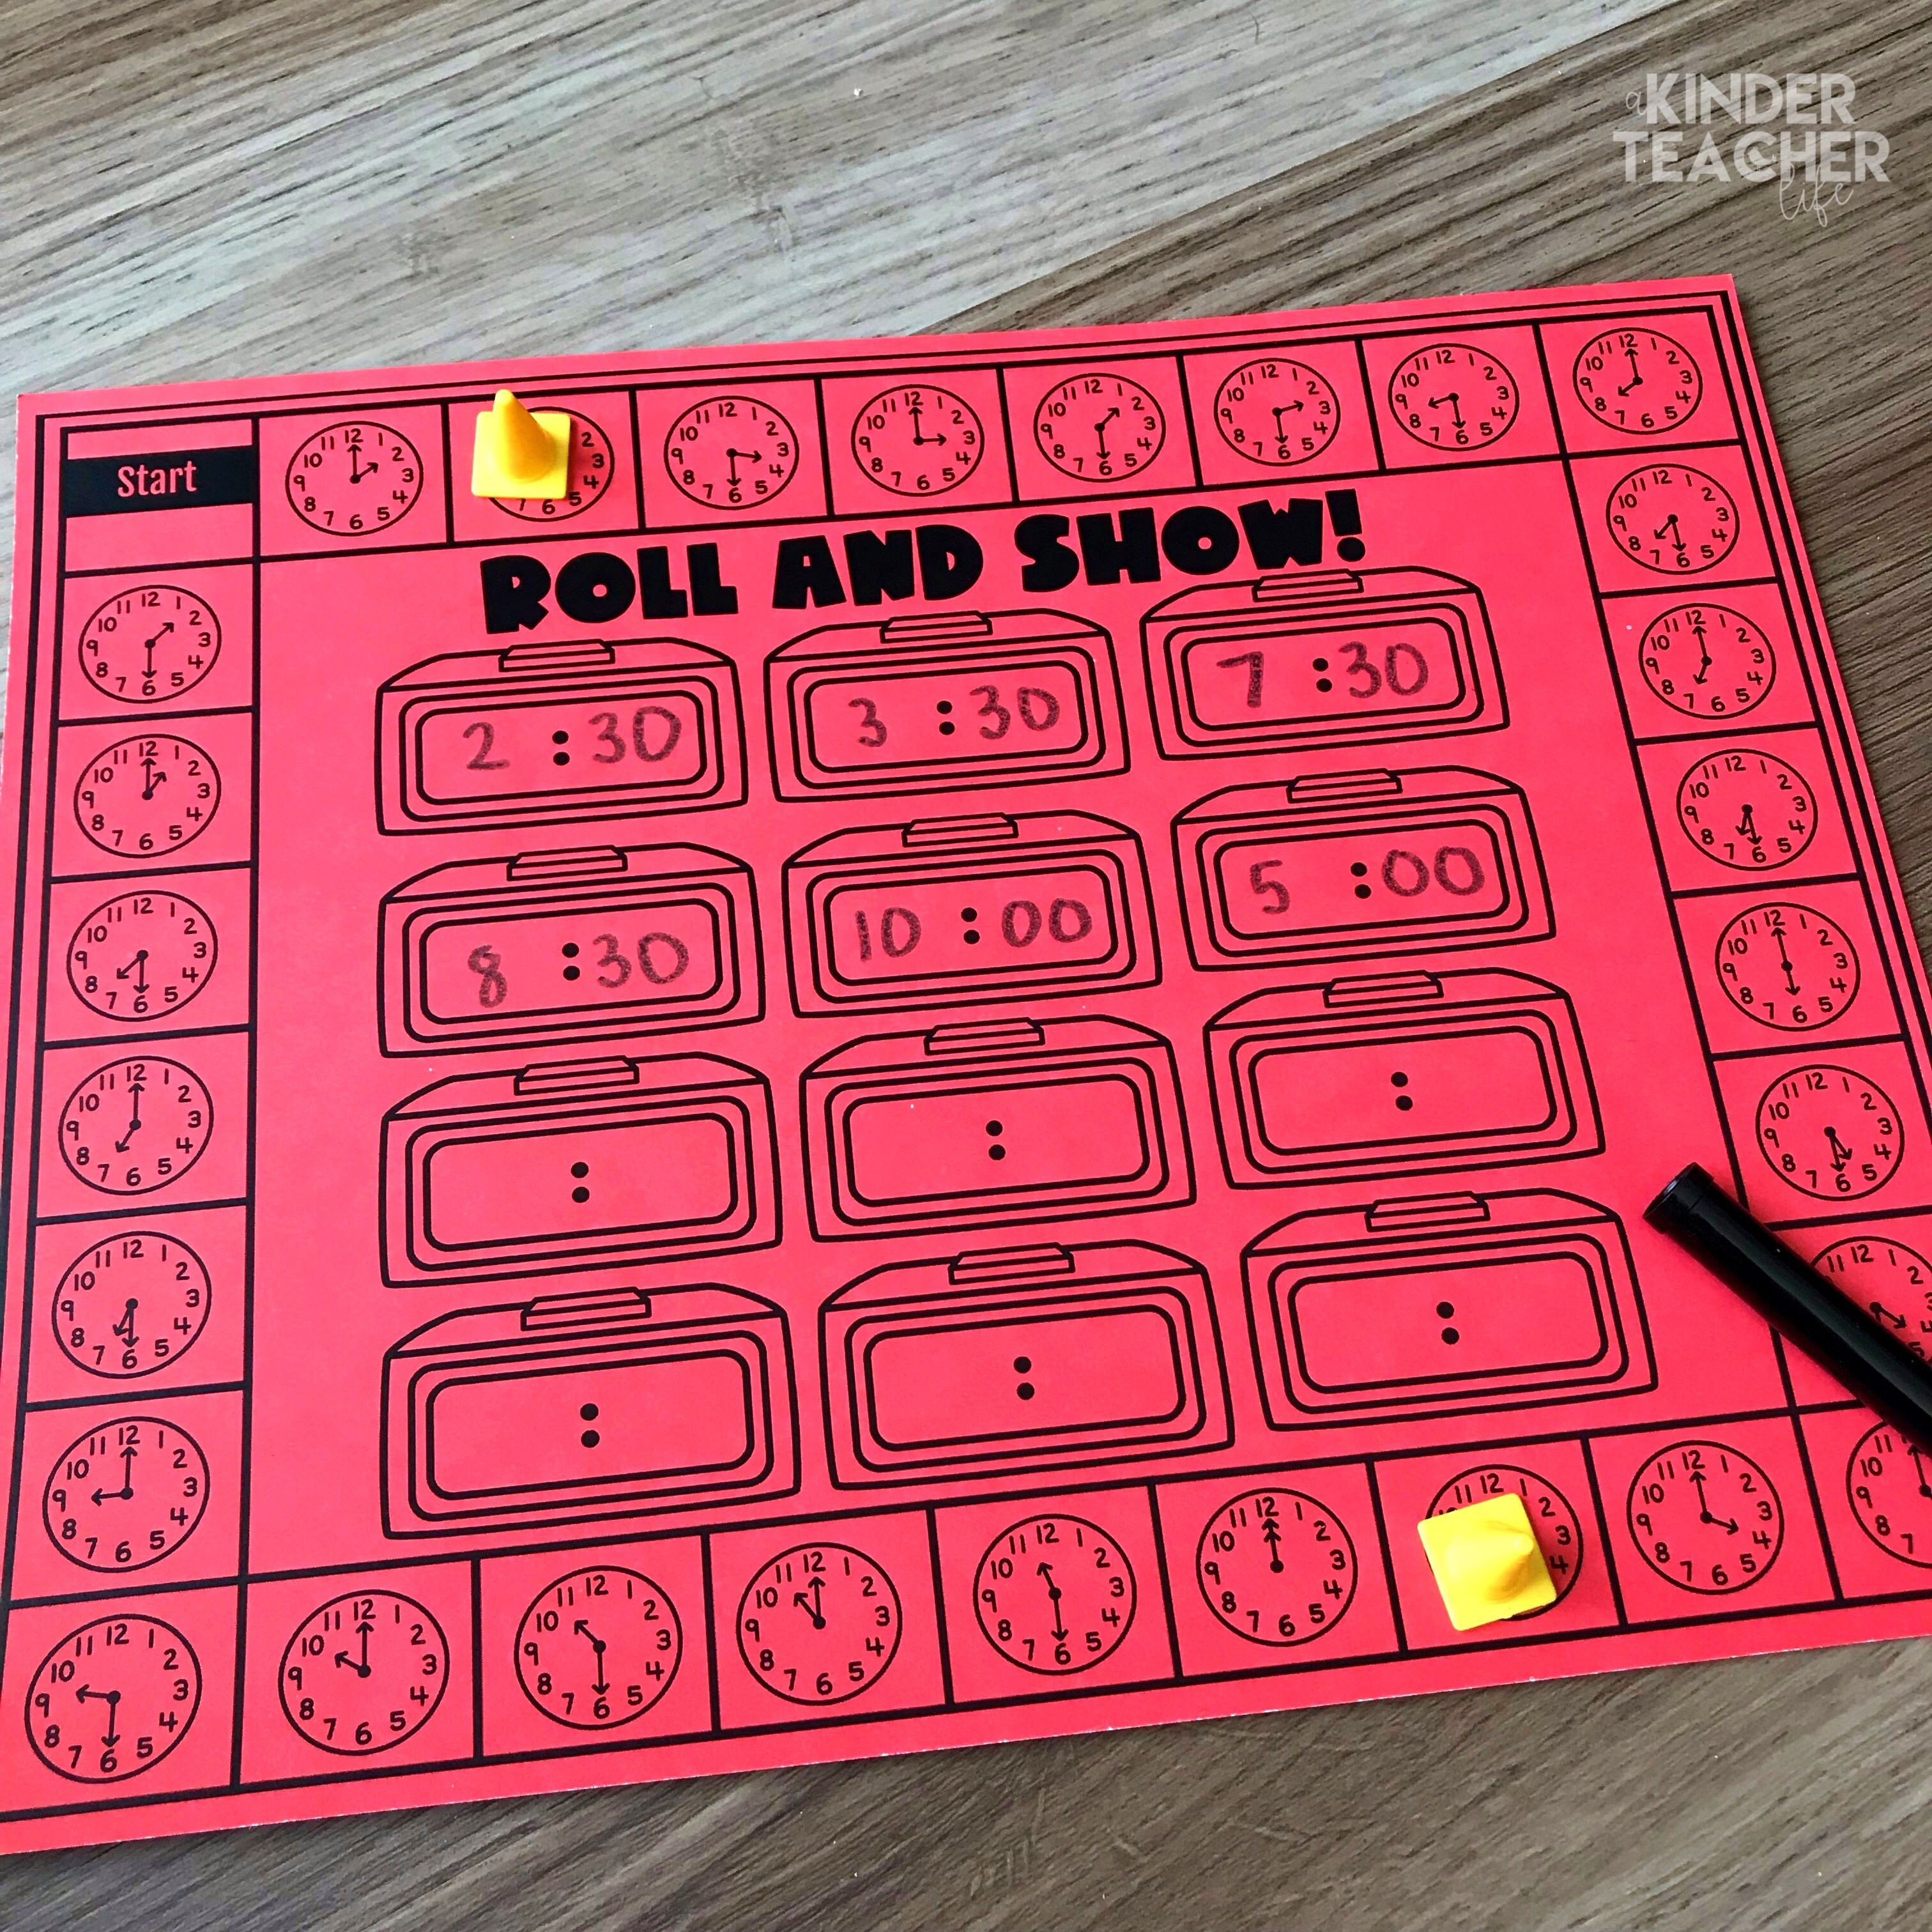 Roll and show telling time game - Hands-on telling time math center activities for first grade students. 